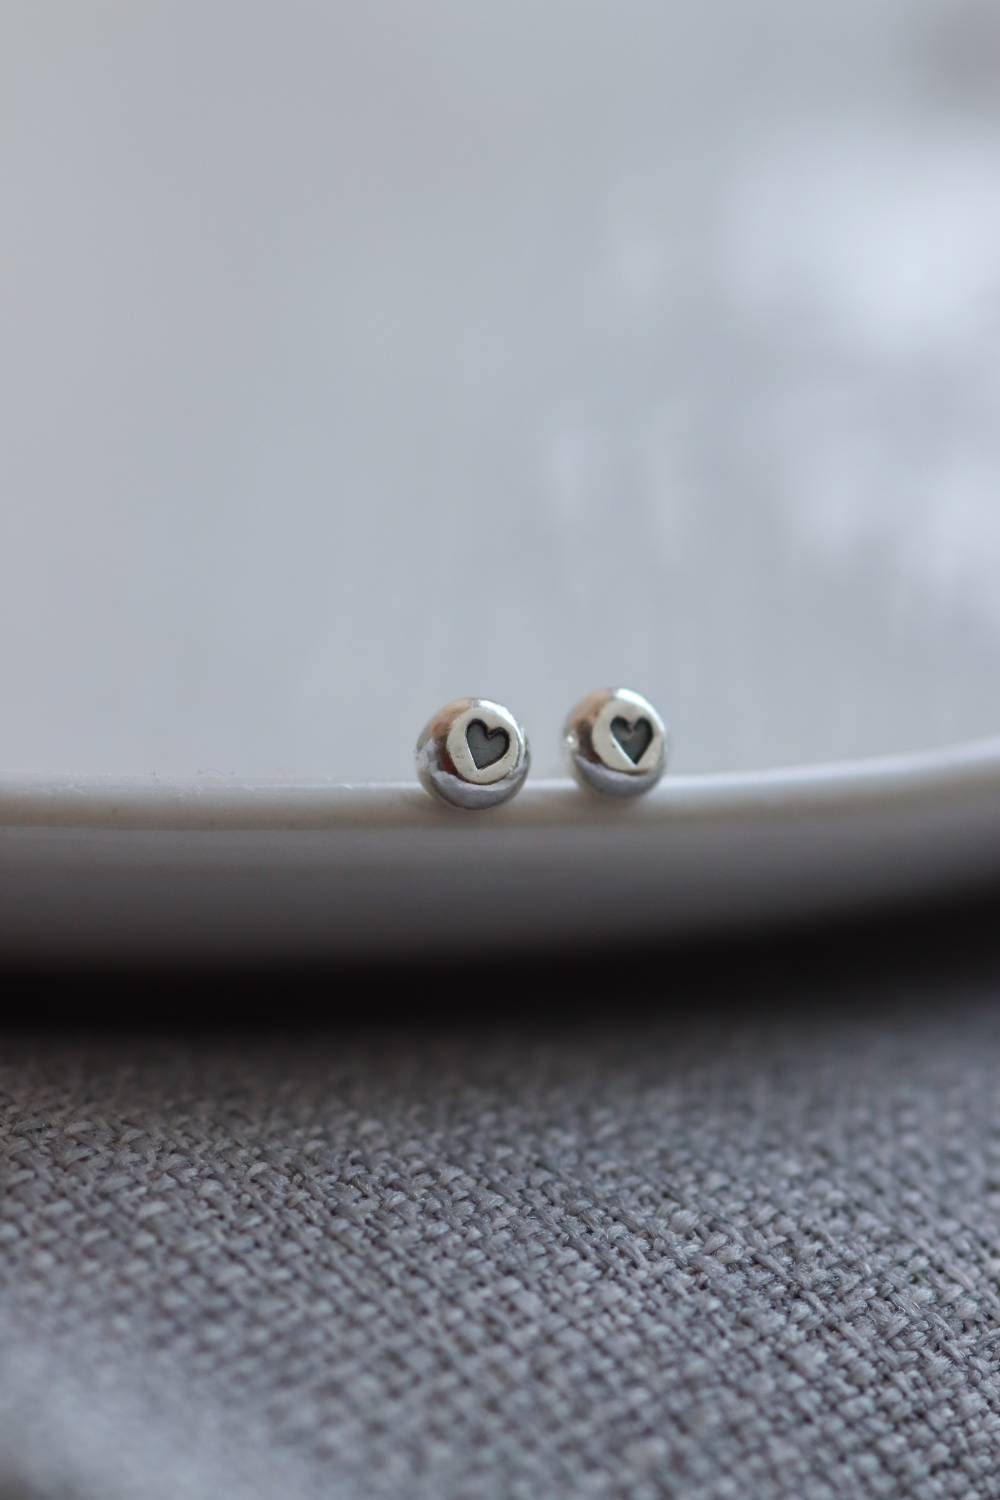 Small Heart Studs / Recycled Silver Dot Earrings with Impressed Hearts / Cute sterling Silver Stud Earrings made by hand